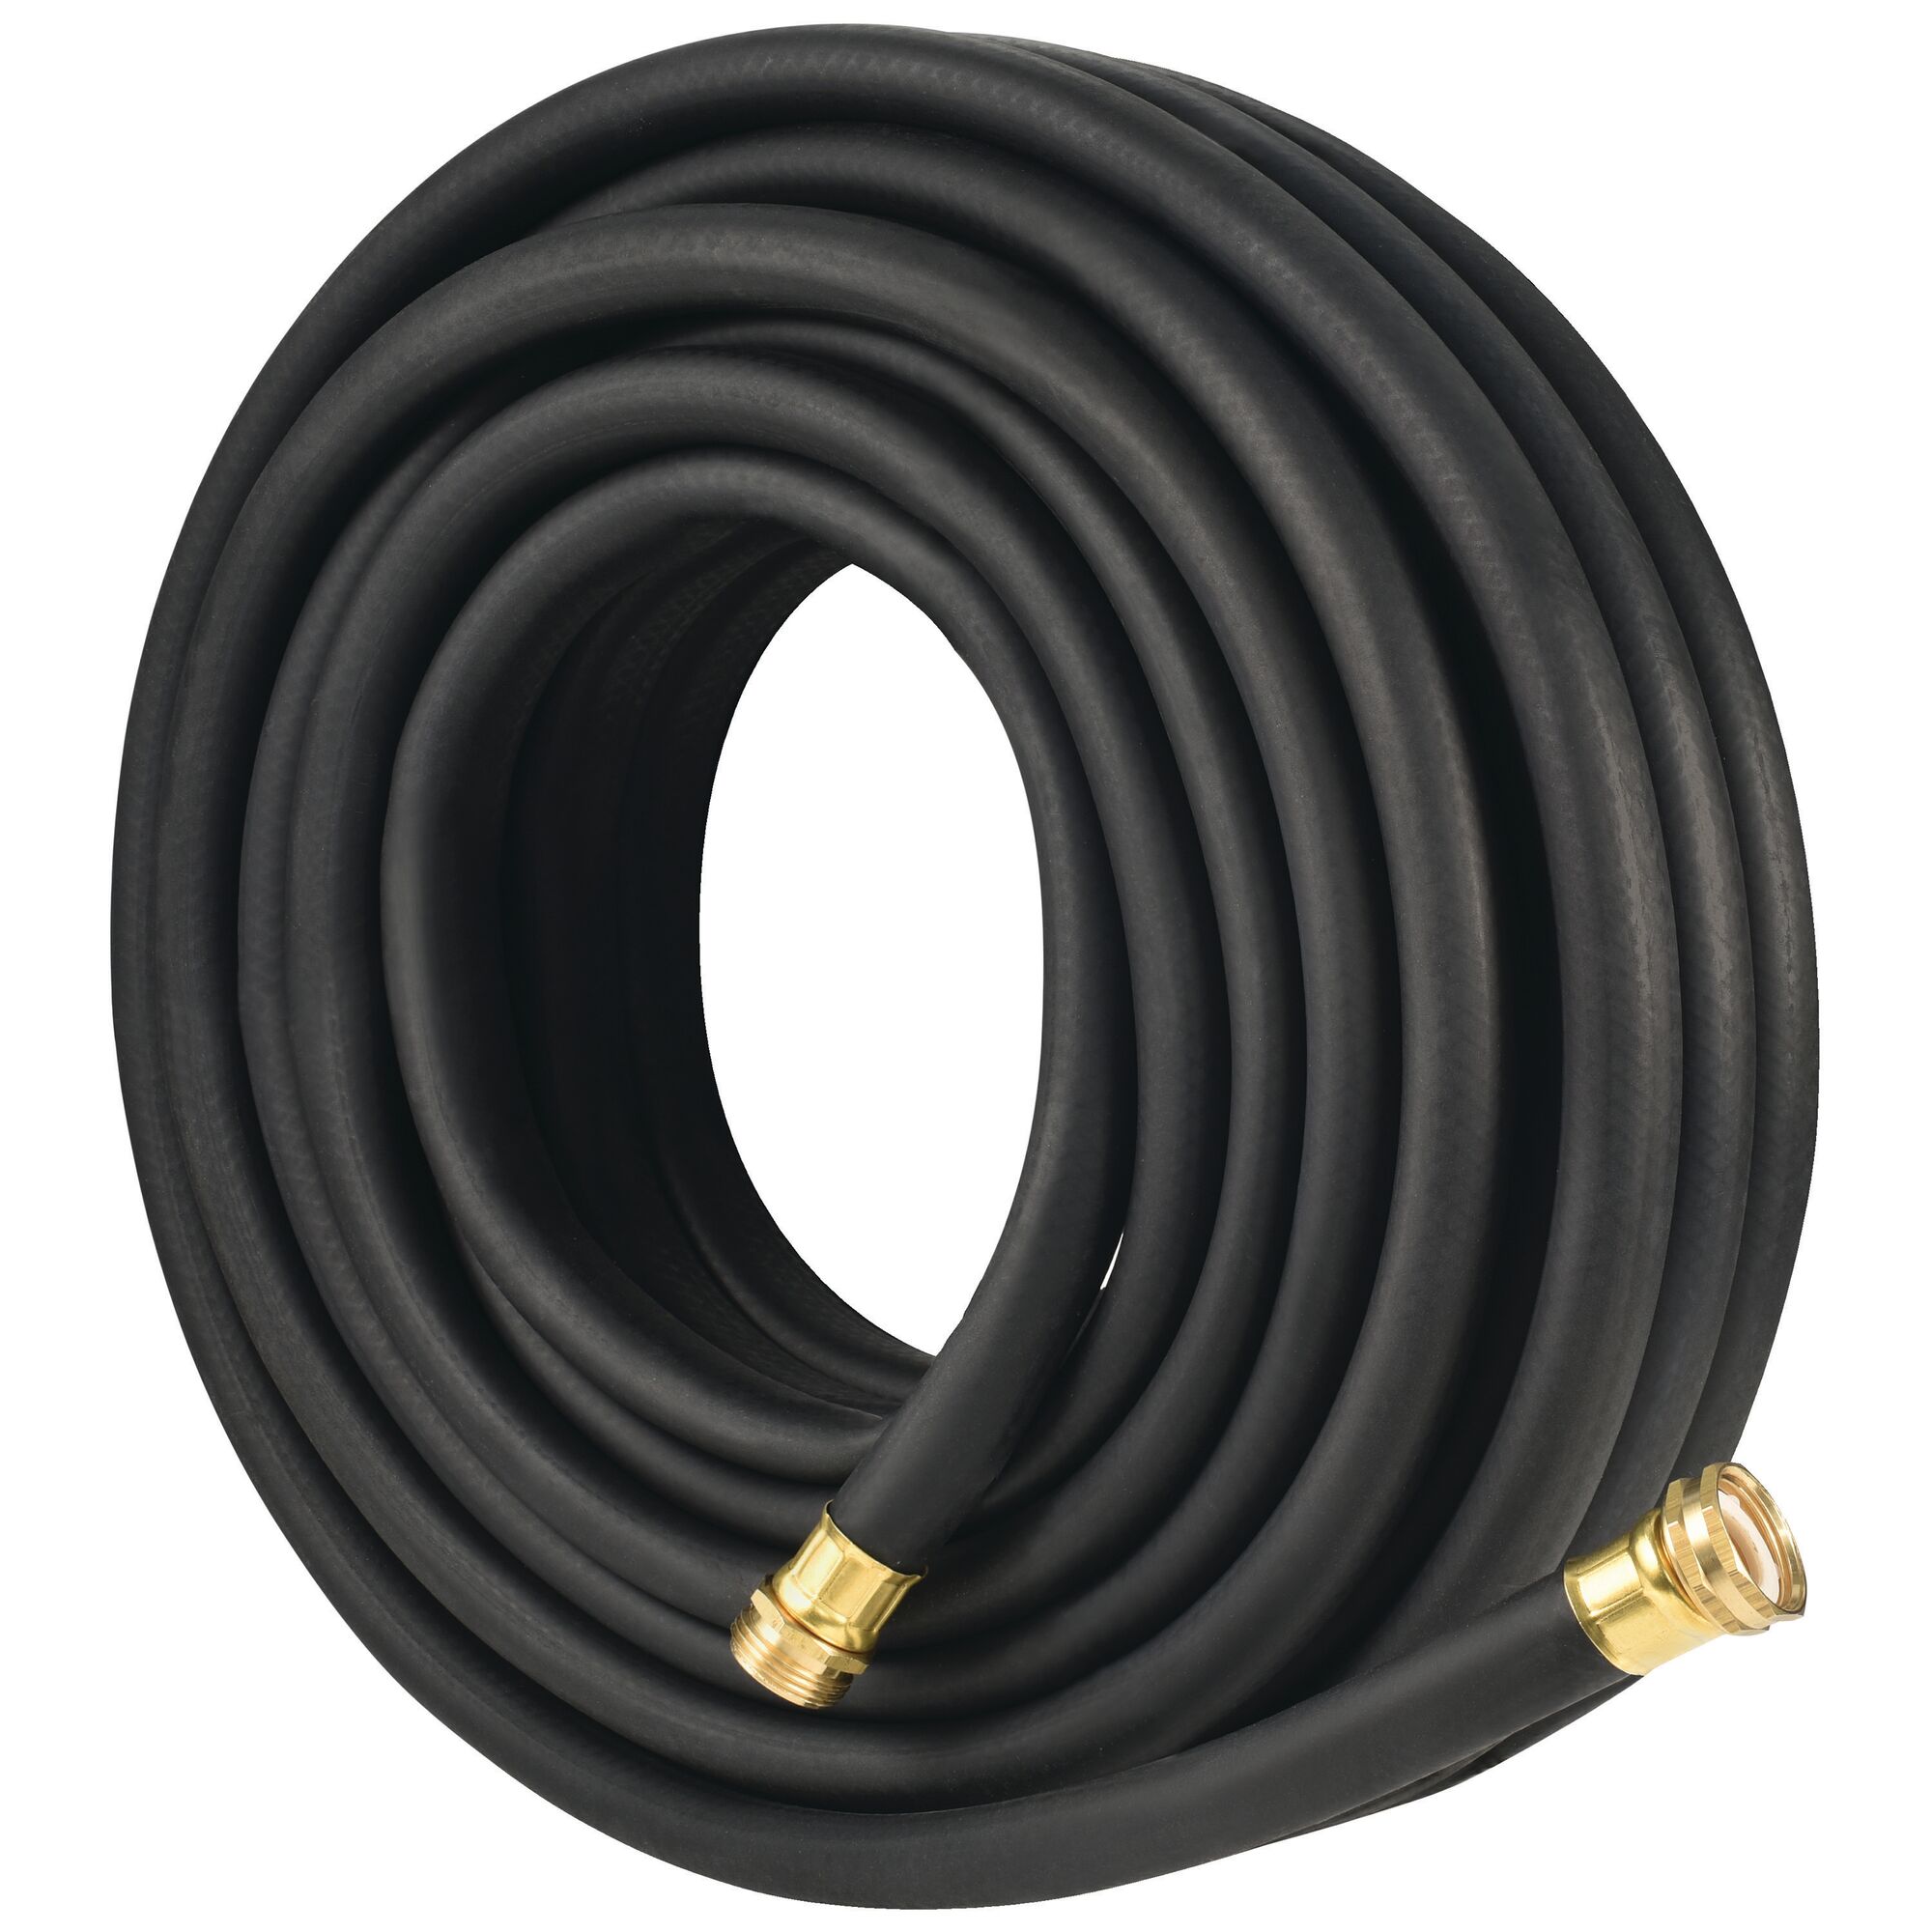 Right profile of 50 feet rubber hose.